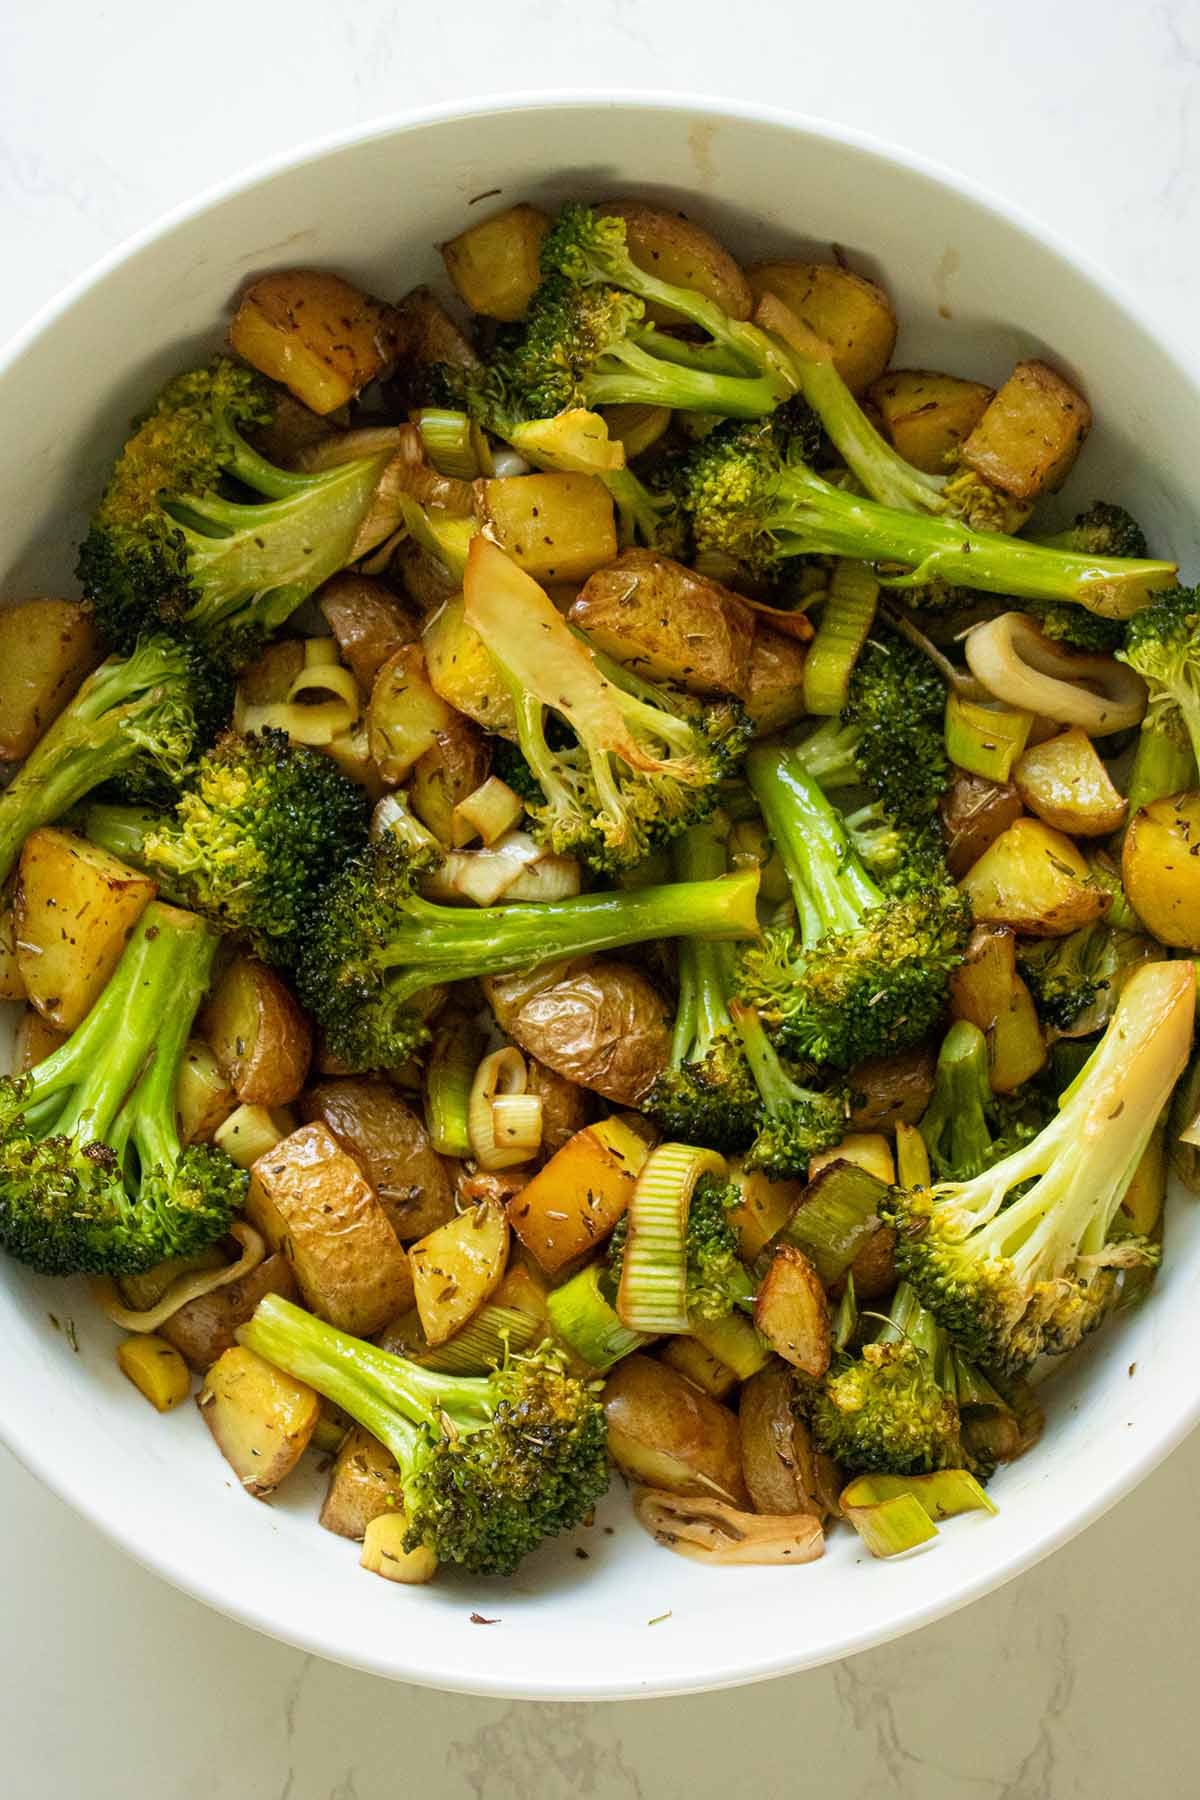 roasted potatoes and broccoli in a bowl before adding the sauce